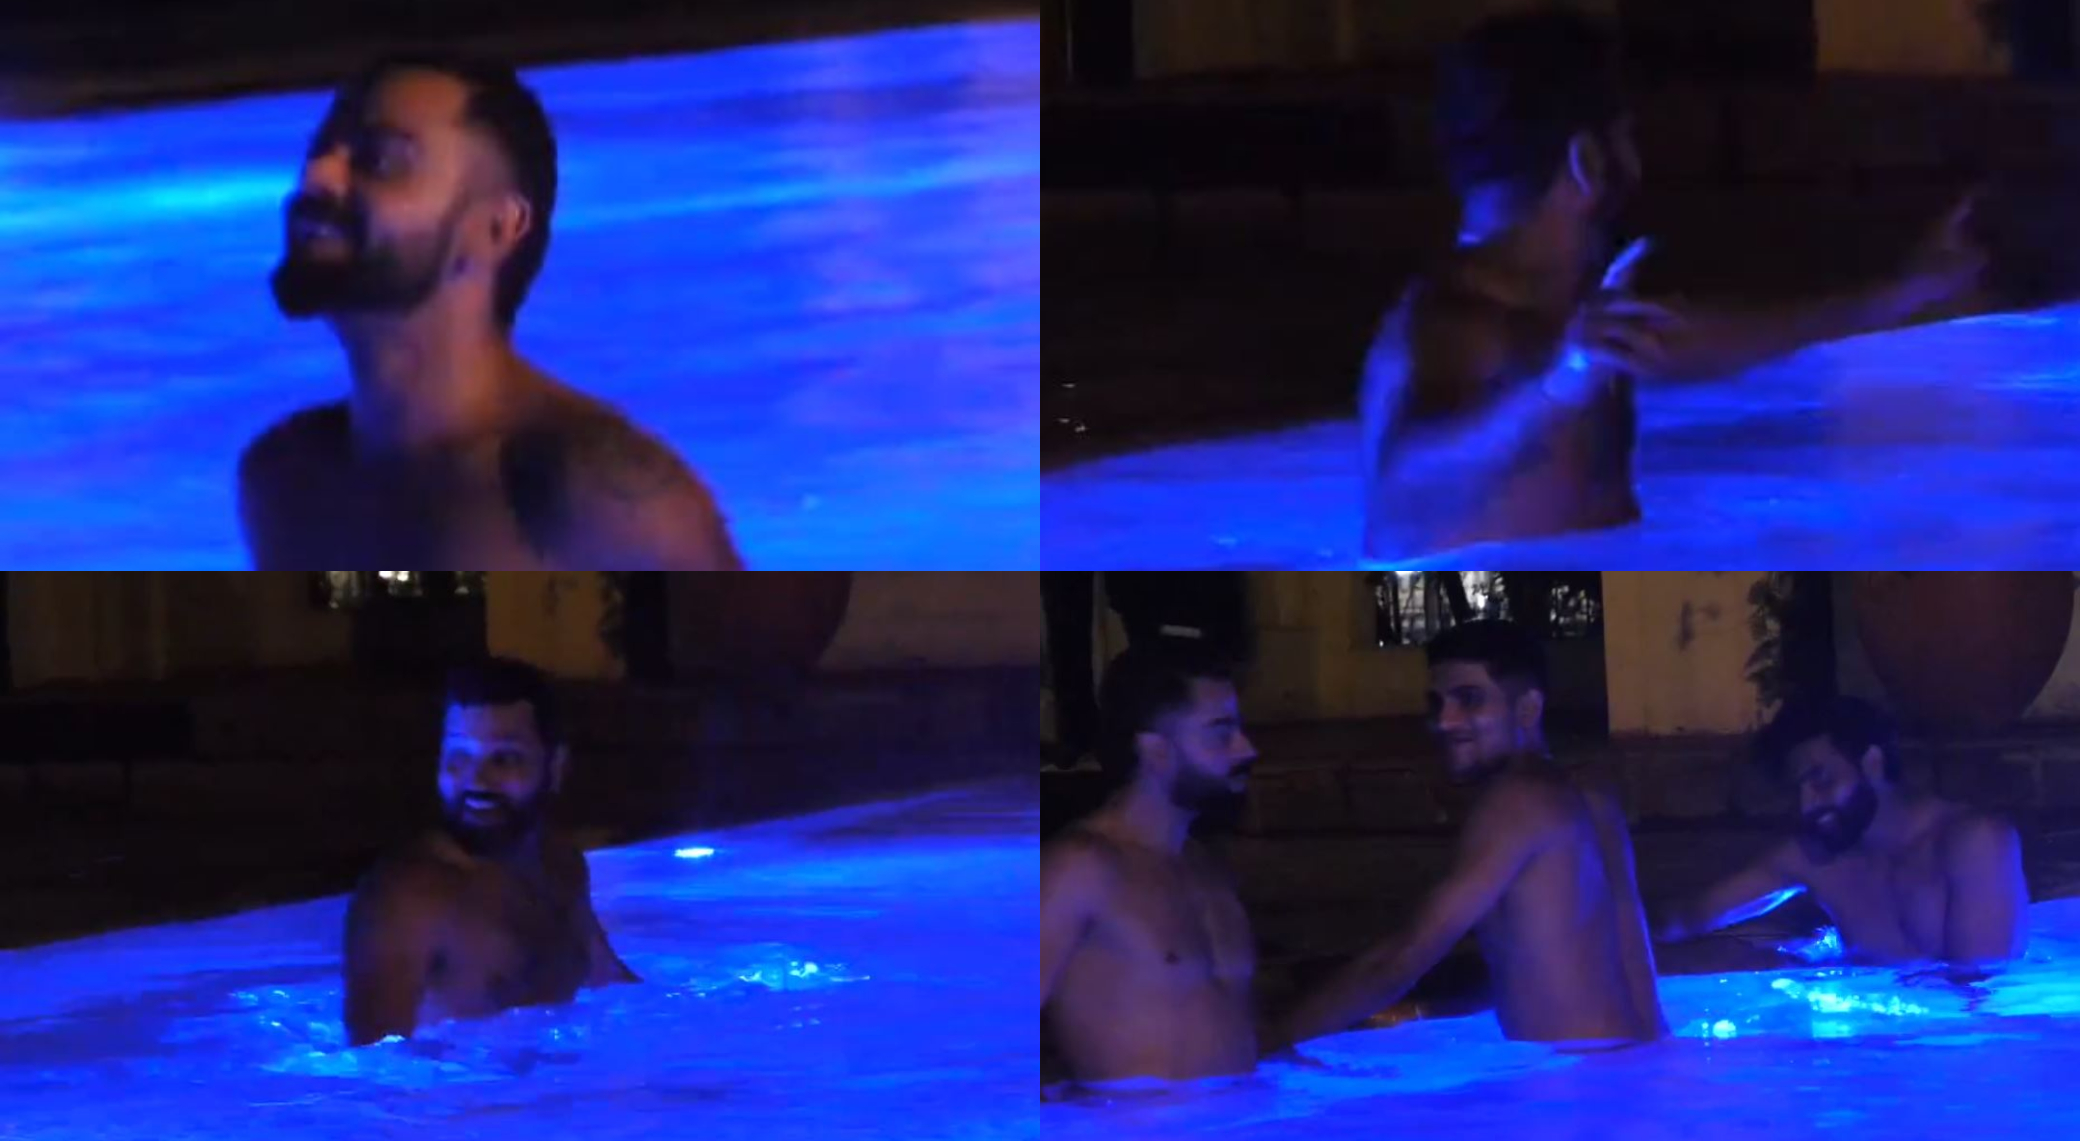 Indian team chilled in swimming pool after win over Pakistan | BCCI